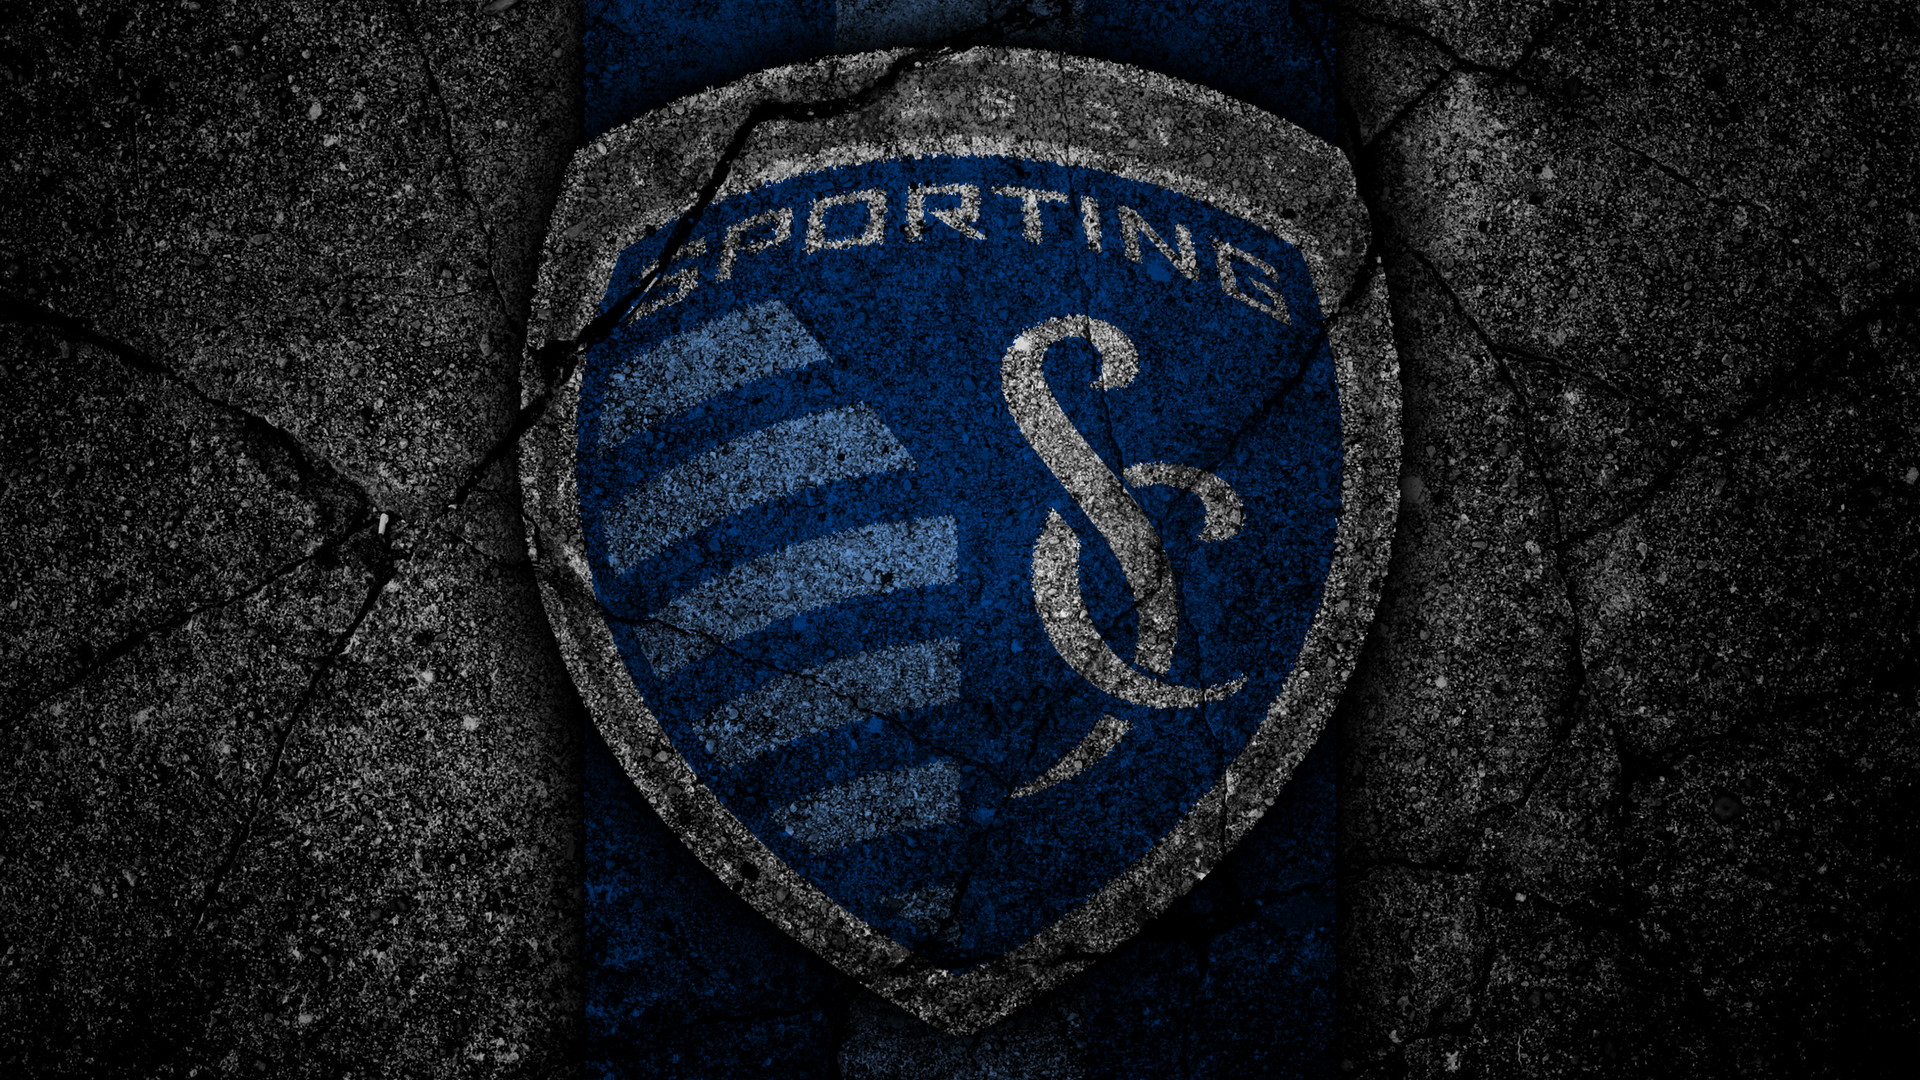 Sporting Kansas City Wallpaper HD With high-resolution 1920X1080 pixel. You can use this wallpaper for your Desktop Computers, Mac Screensavers, Windows Backgrounds, iPhone Wallpapers, Tablet or Android Lock screen and another Mobile device